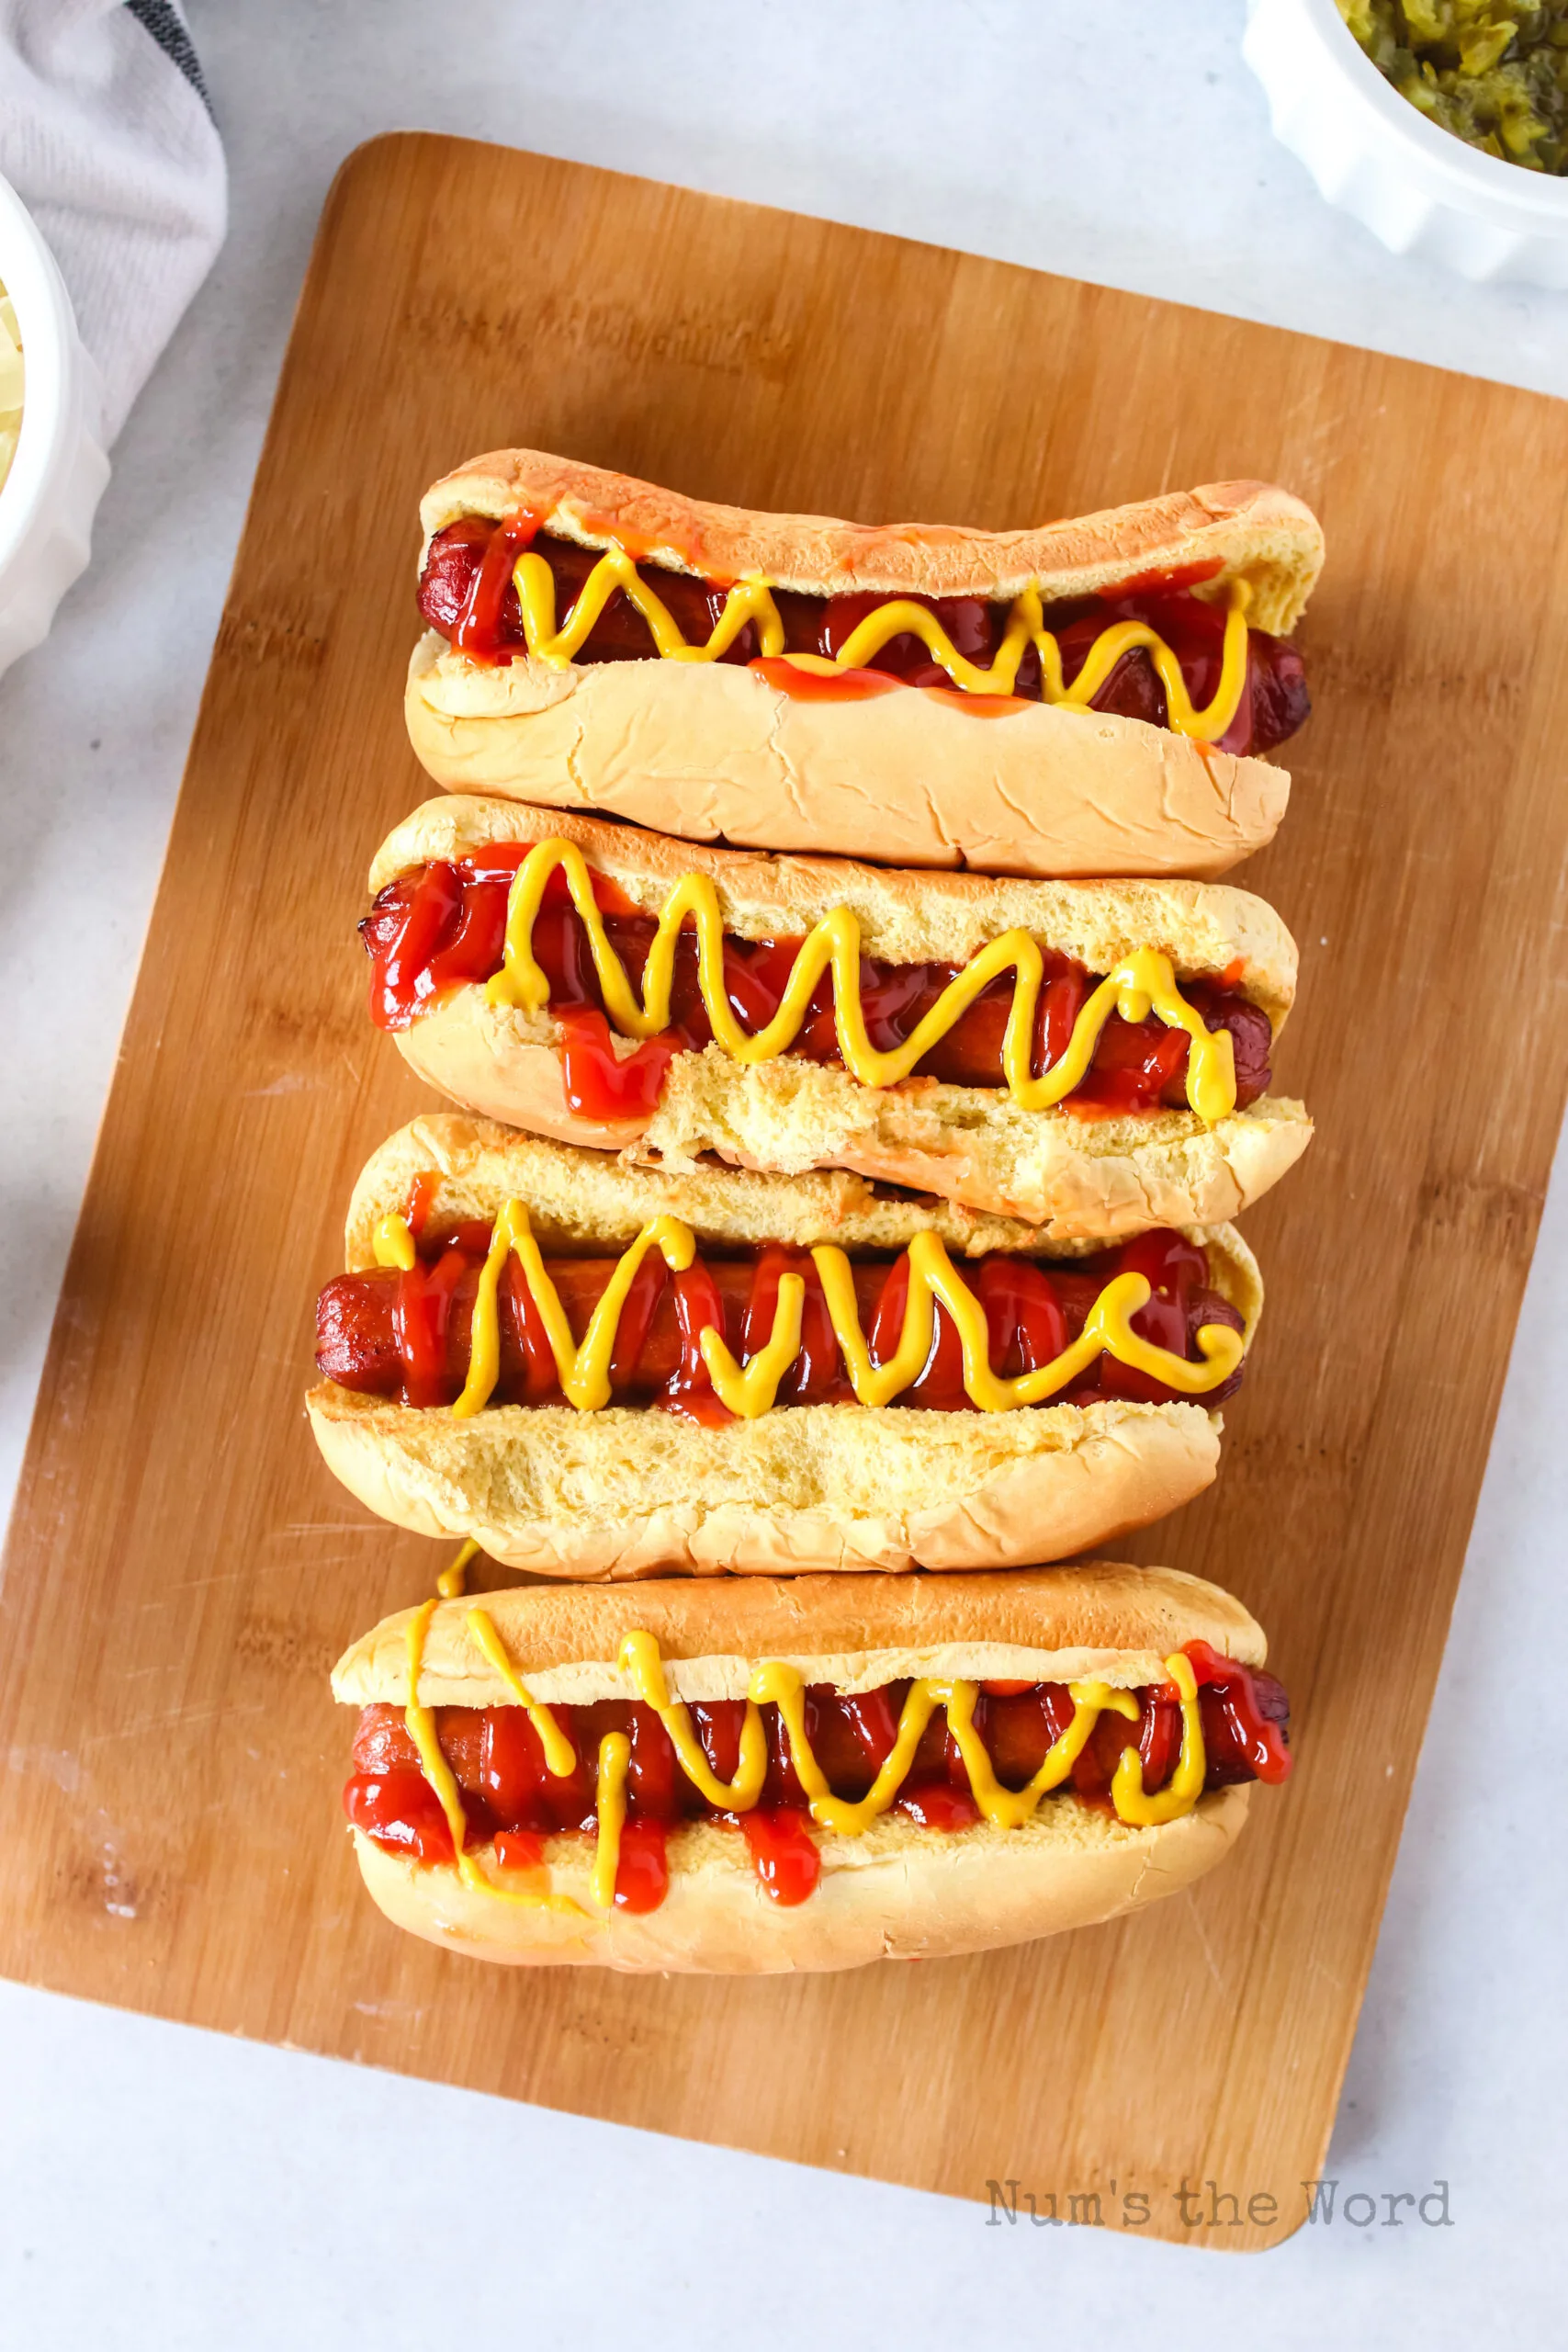 hot dogs with ketchup and mustard, top angle view